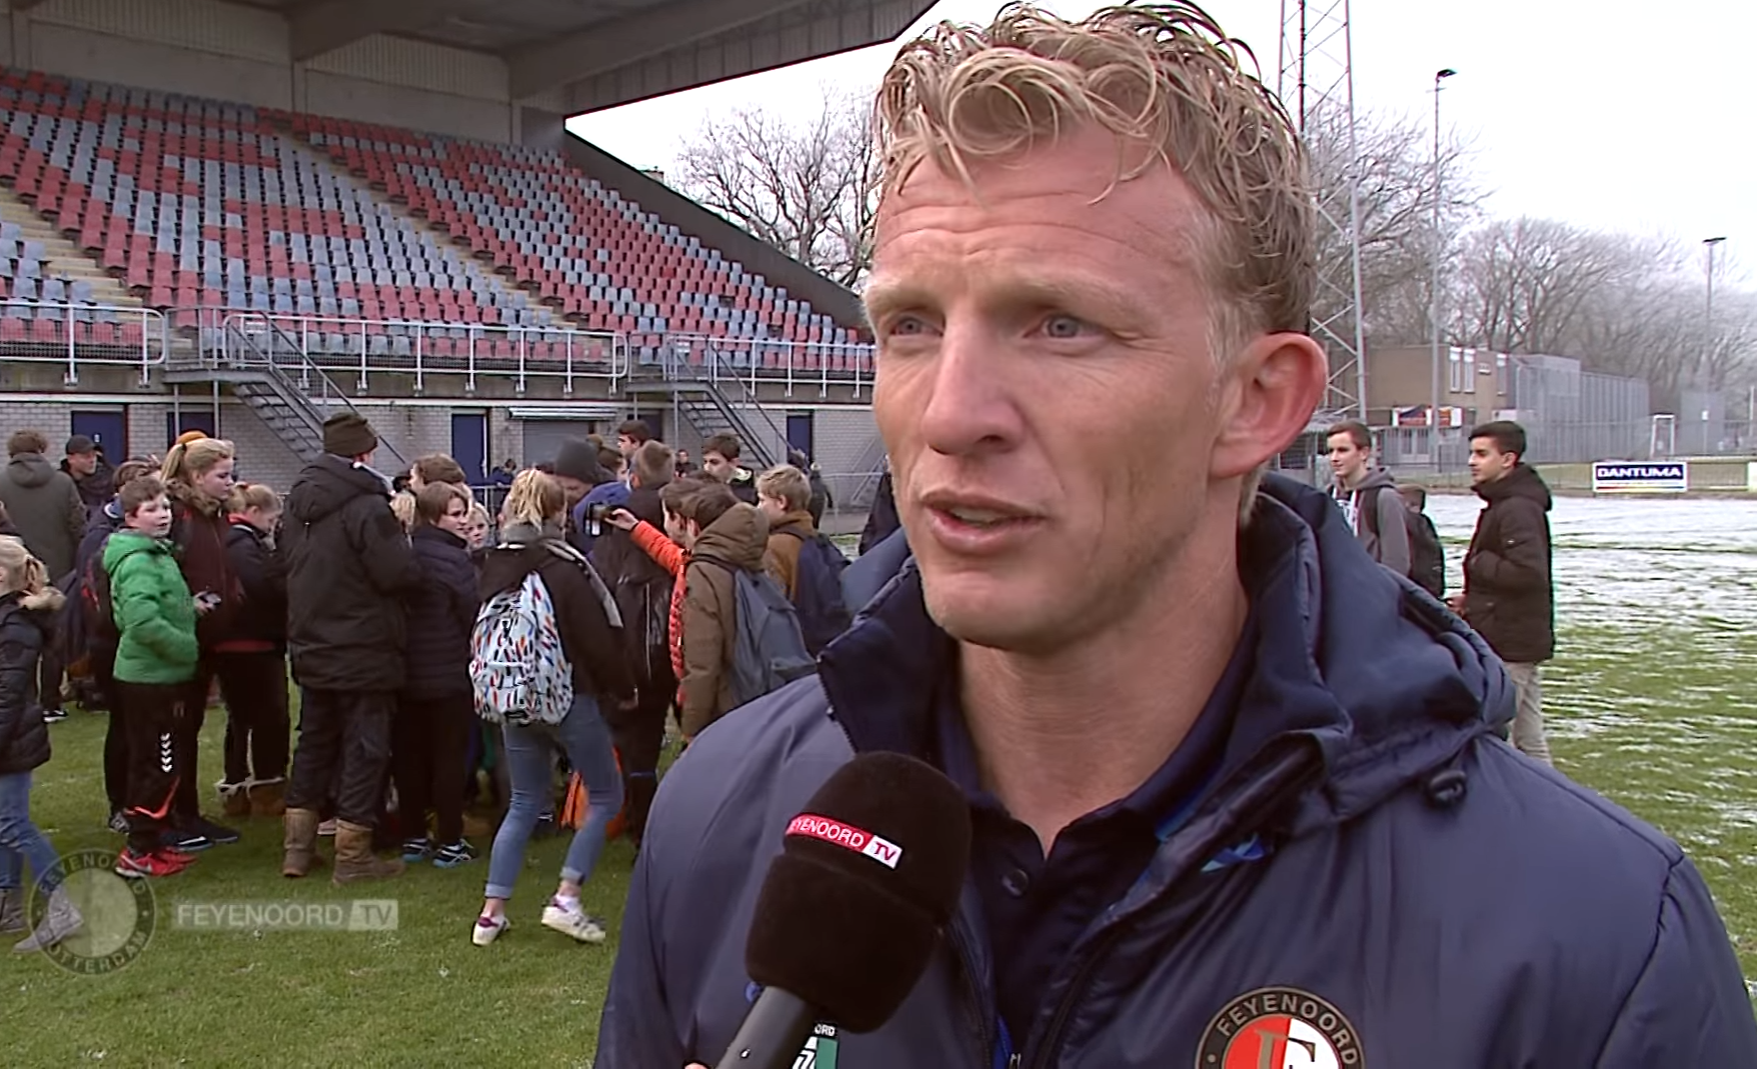 Kuyt%20Syndroom